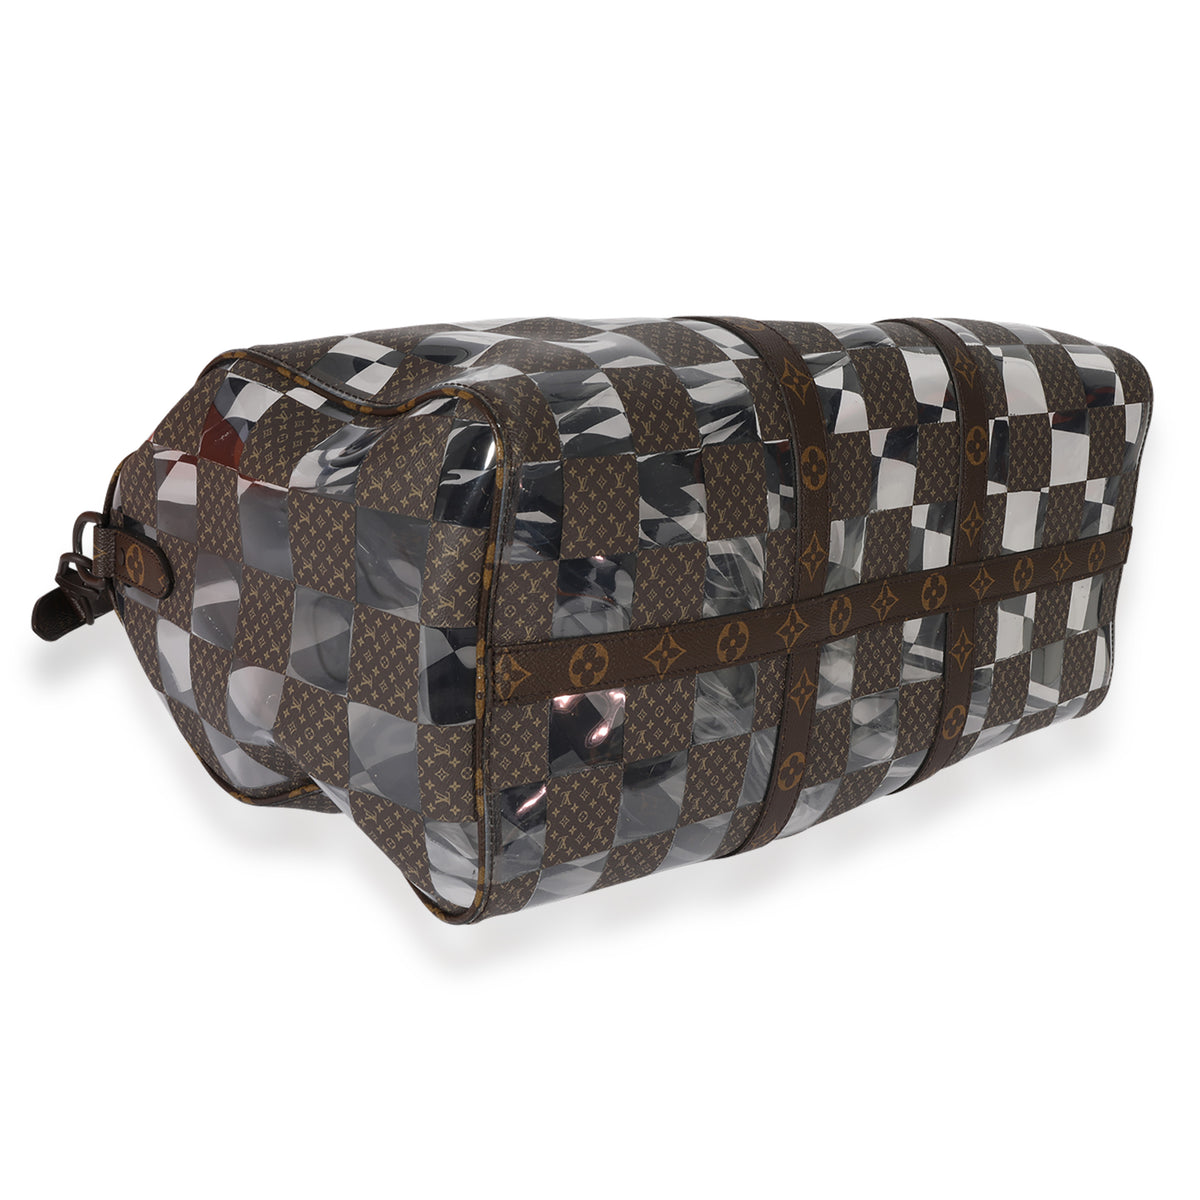 Louis Vuitton LV classic old chess board for men and women travel bag